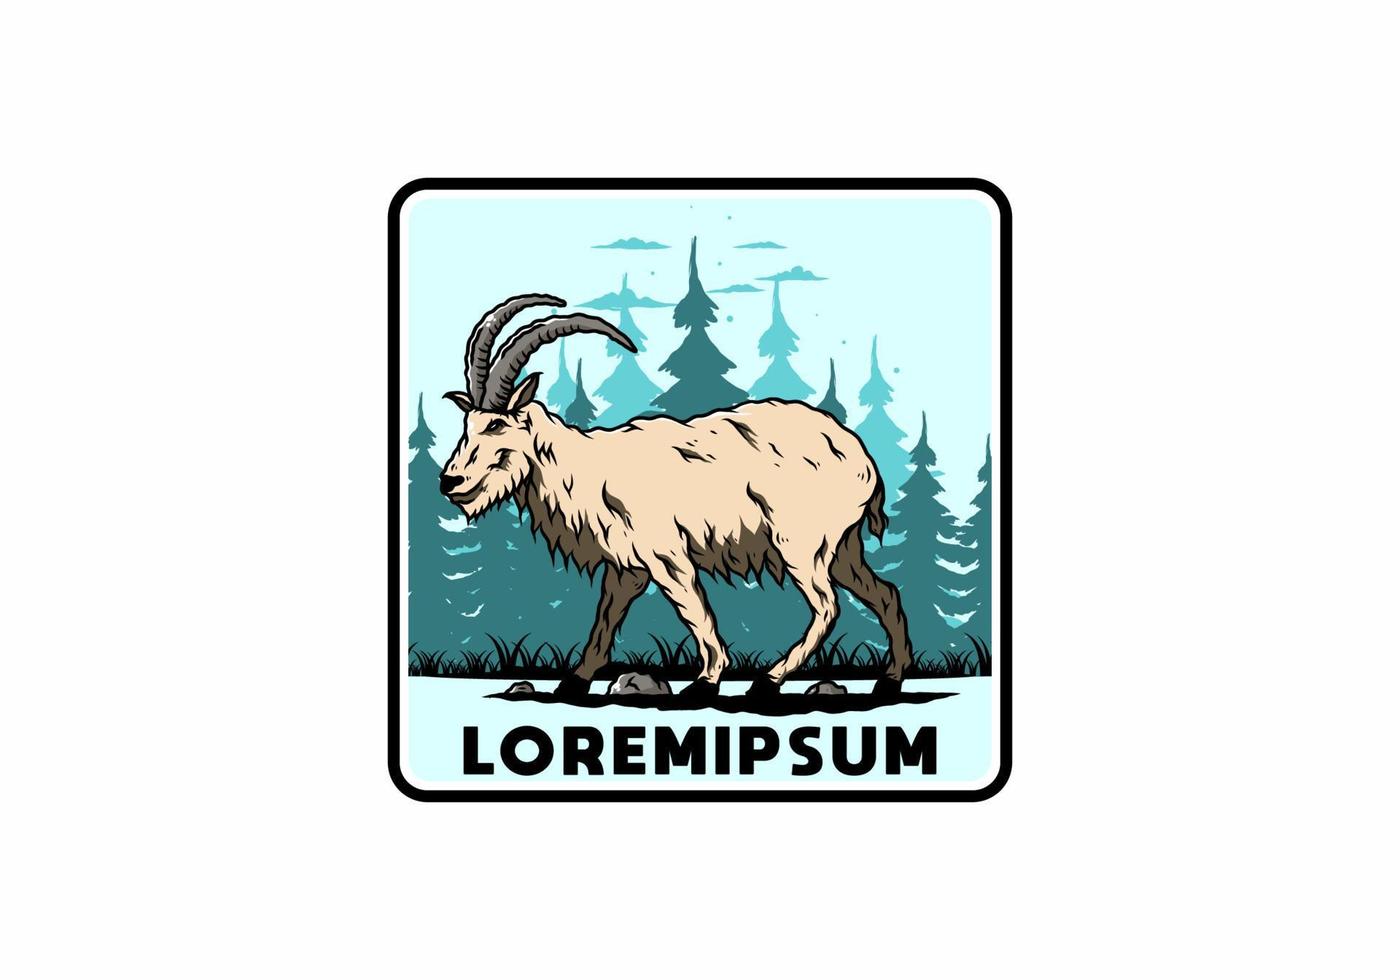 Hairy mountain goat with long horns vector